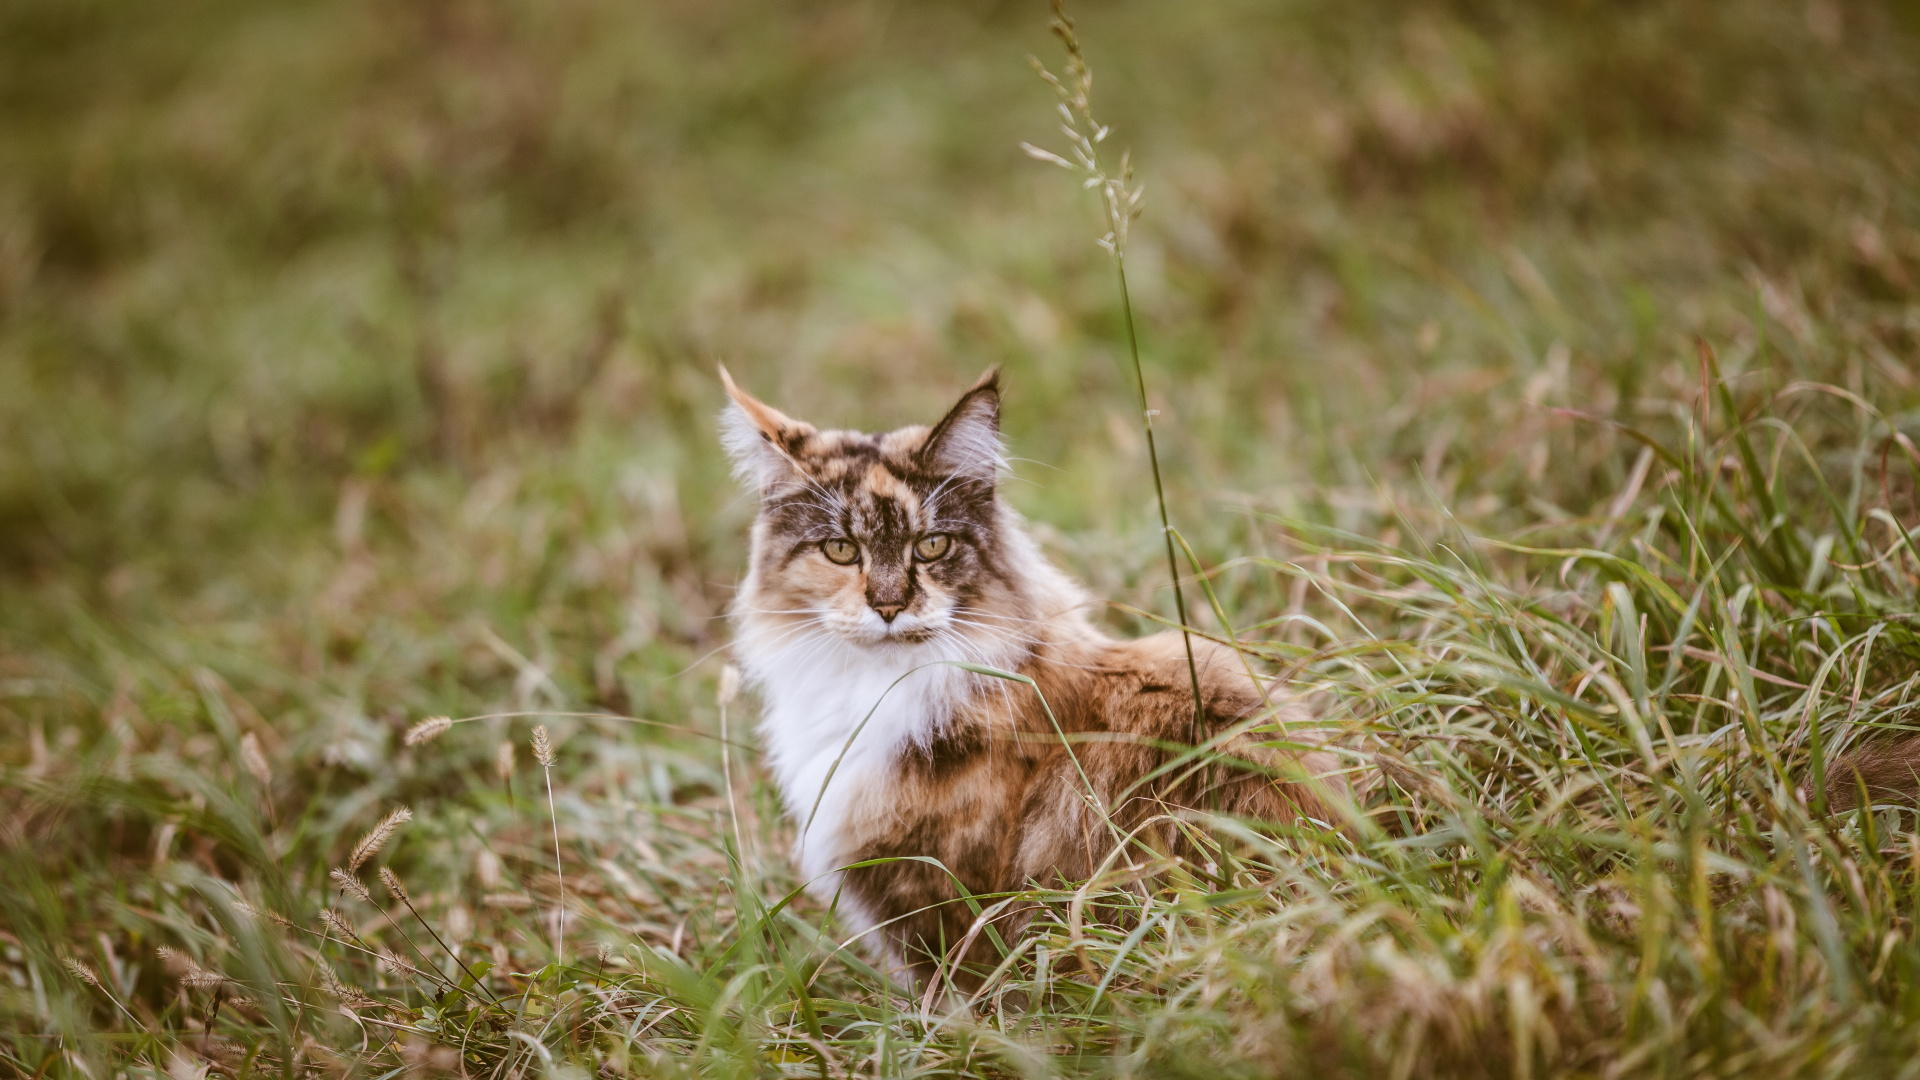 Brown and White Cat on Green Grass During Daytime. Wallpaper in 1920x1080 Resolution